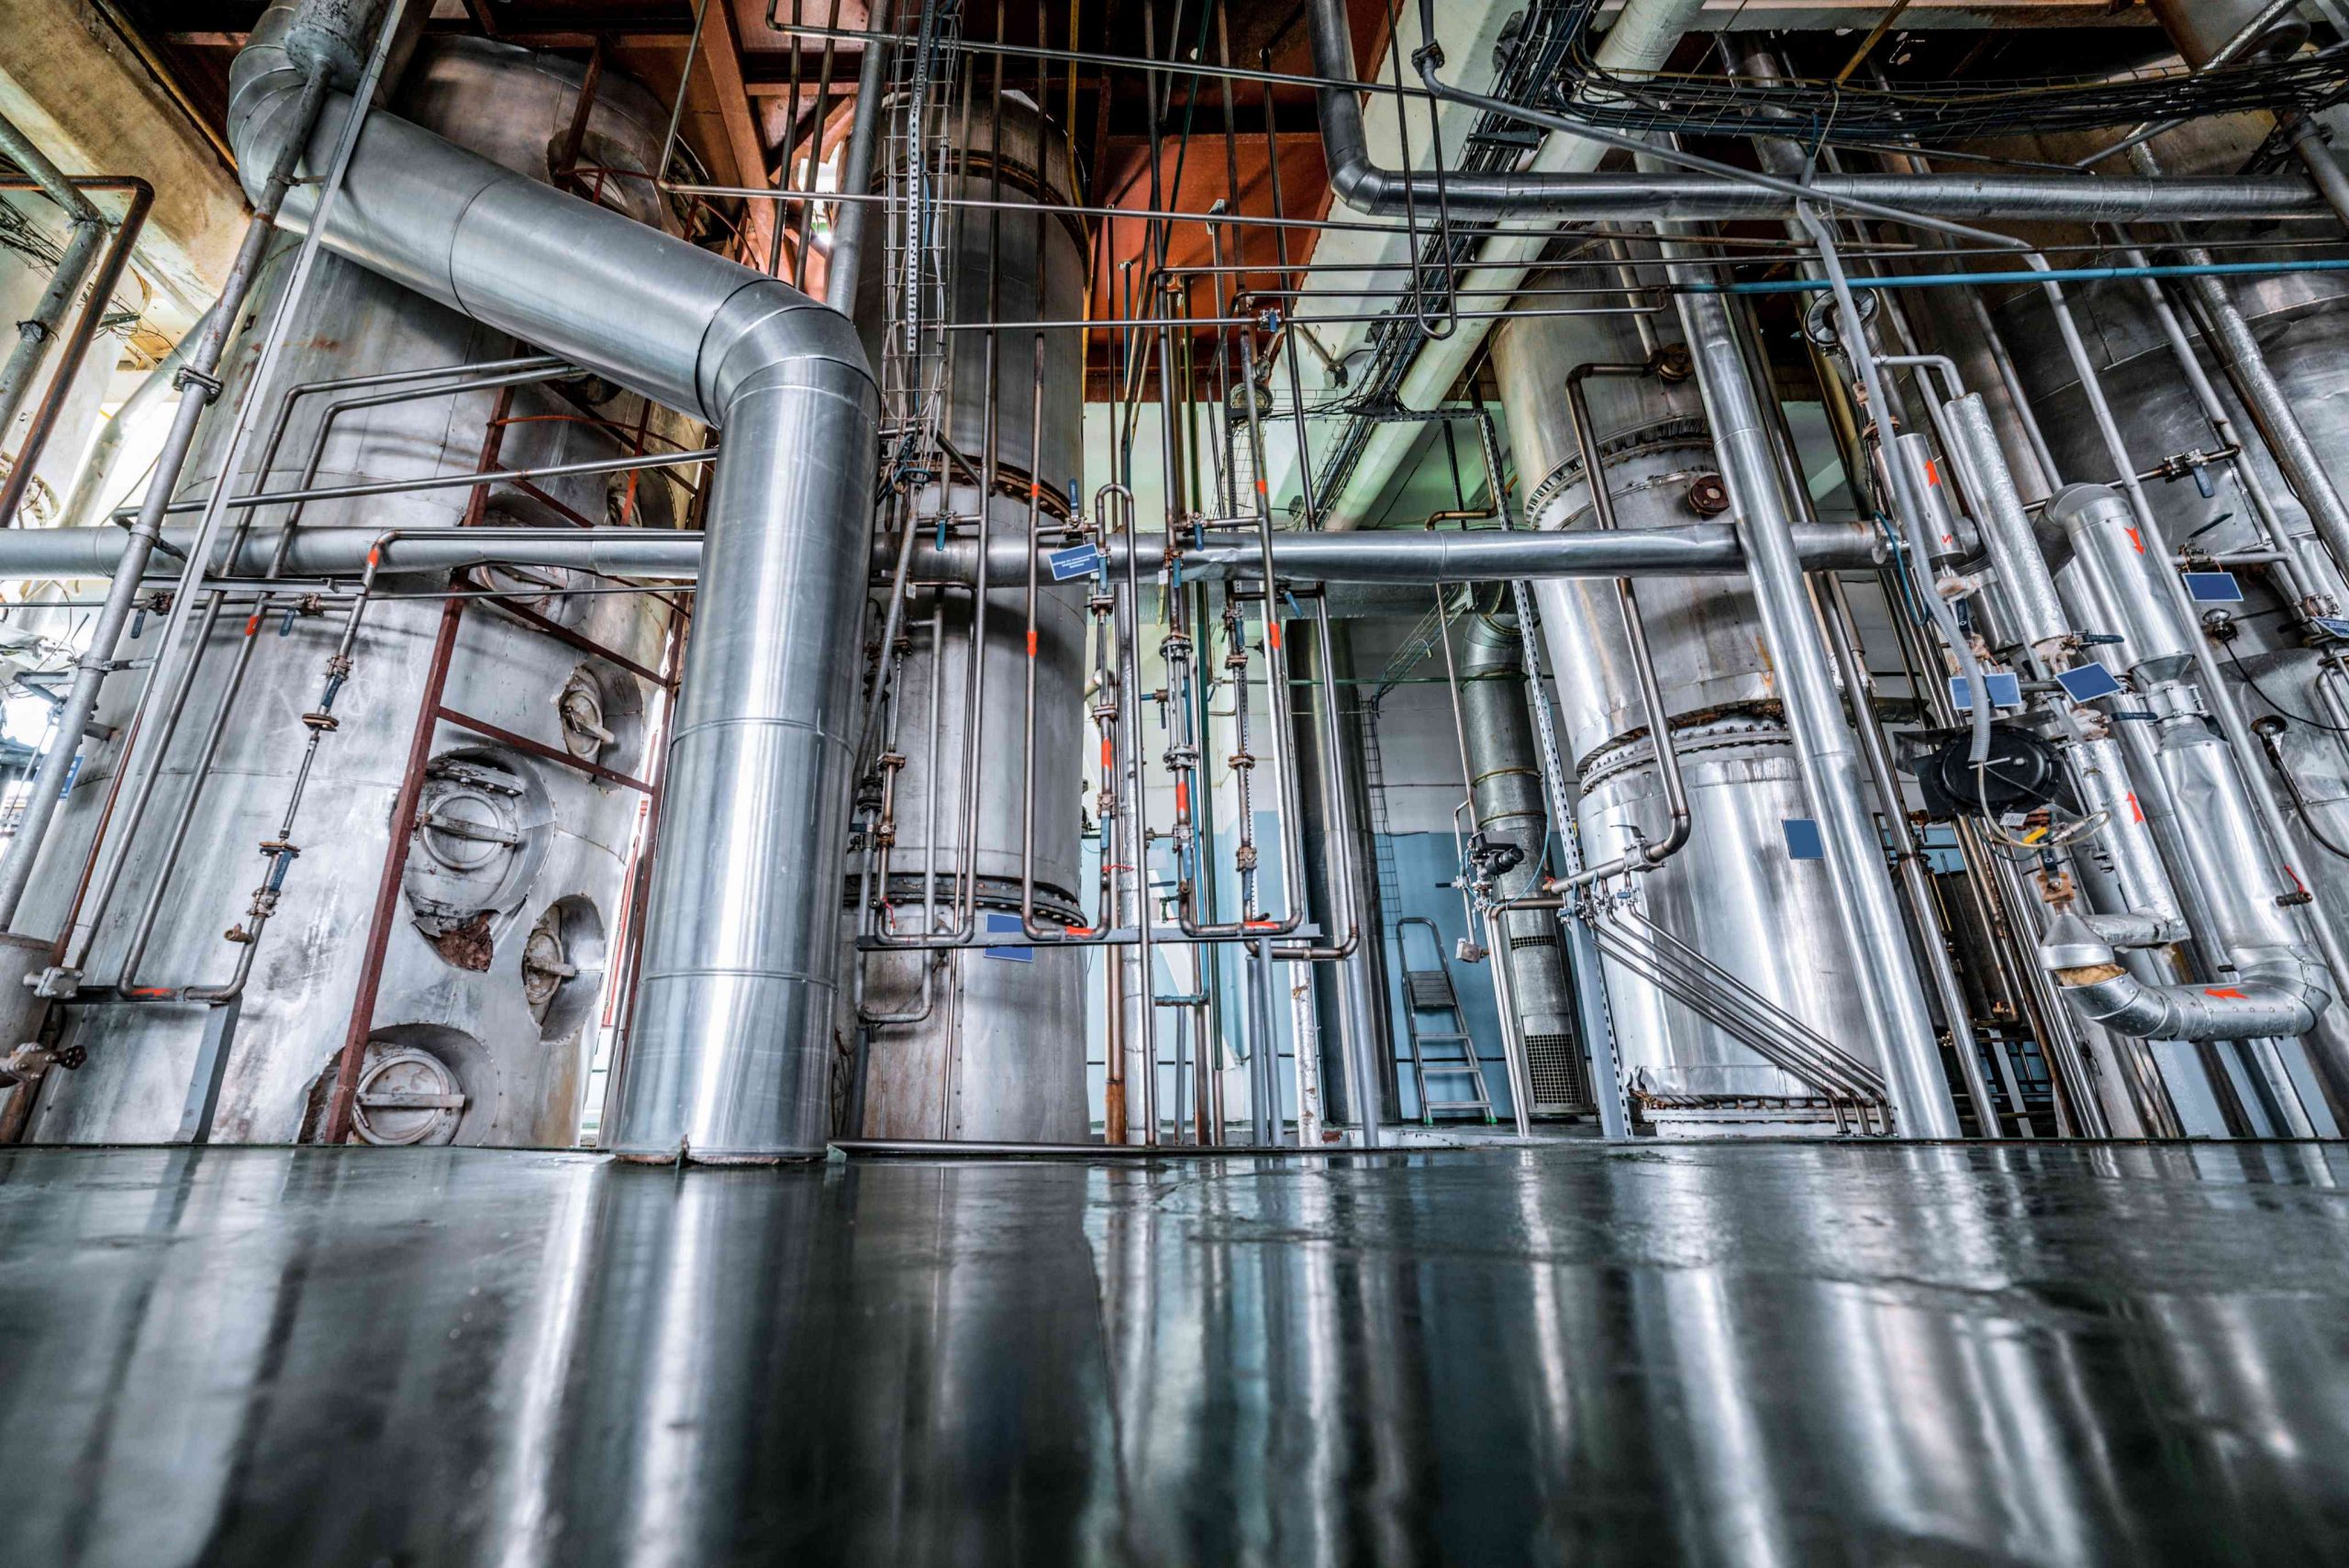 Silvery distillation columns at a chemical processing plant entangled in a multitude of pipes, valves, and sensors.